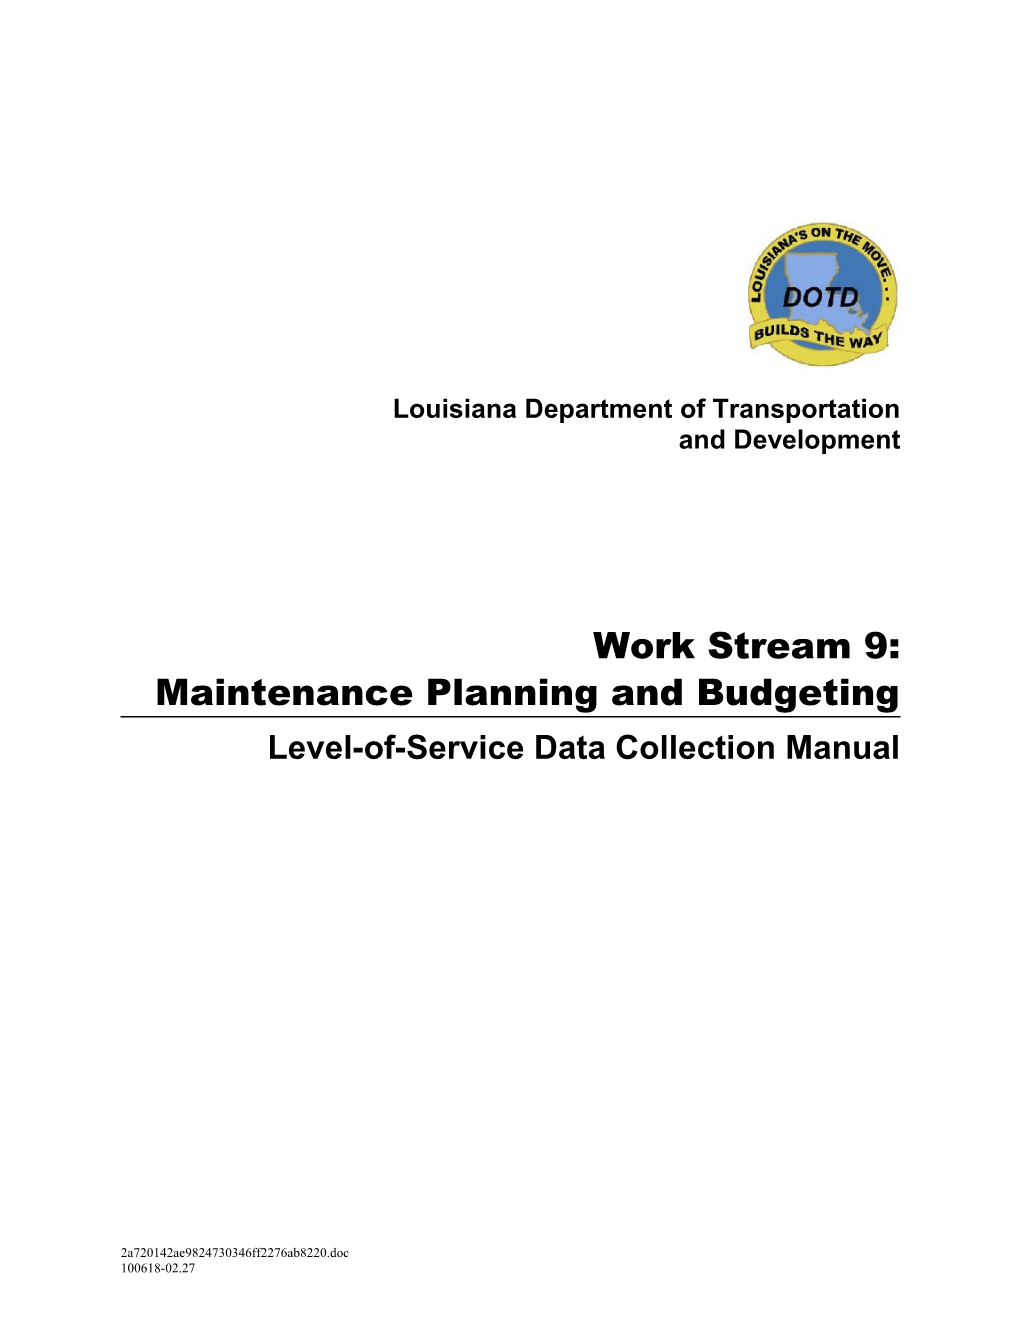 Level-Of-Service Data Collection Manual